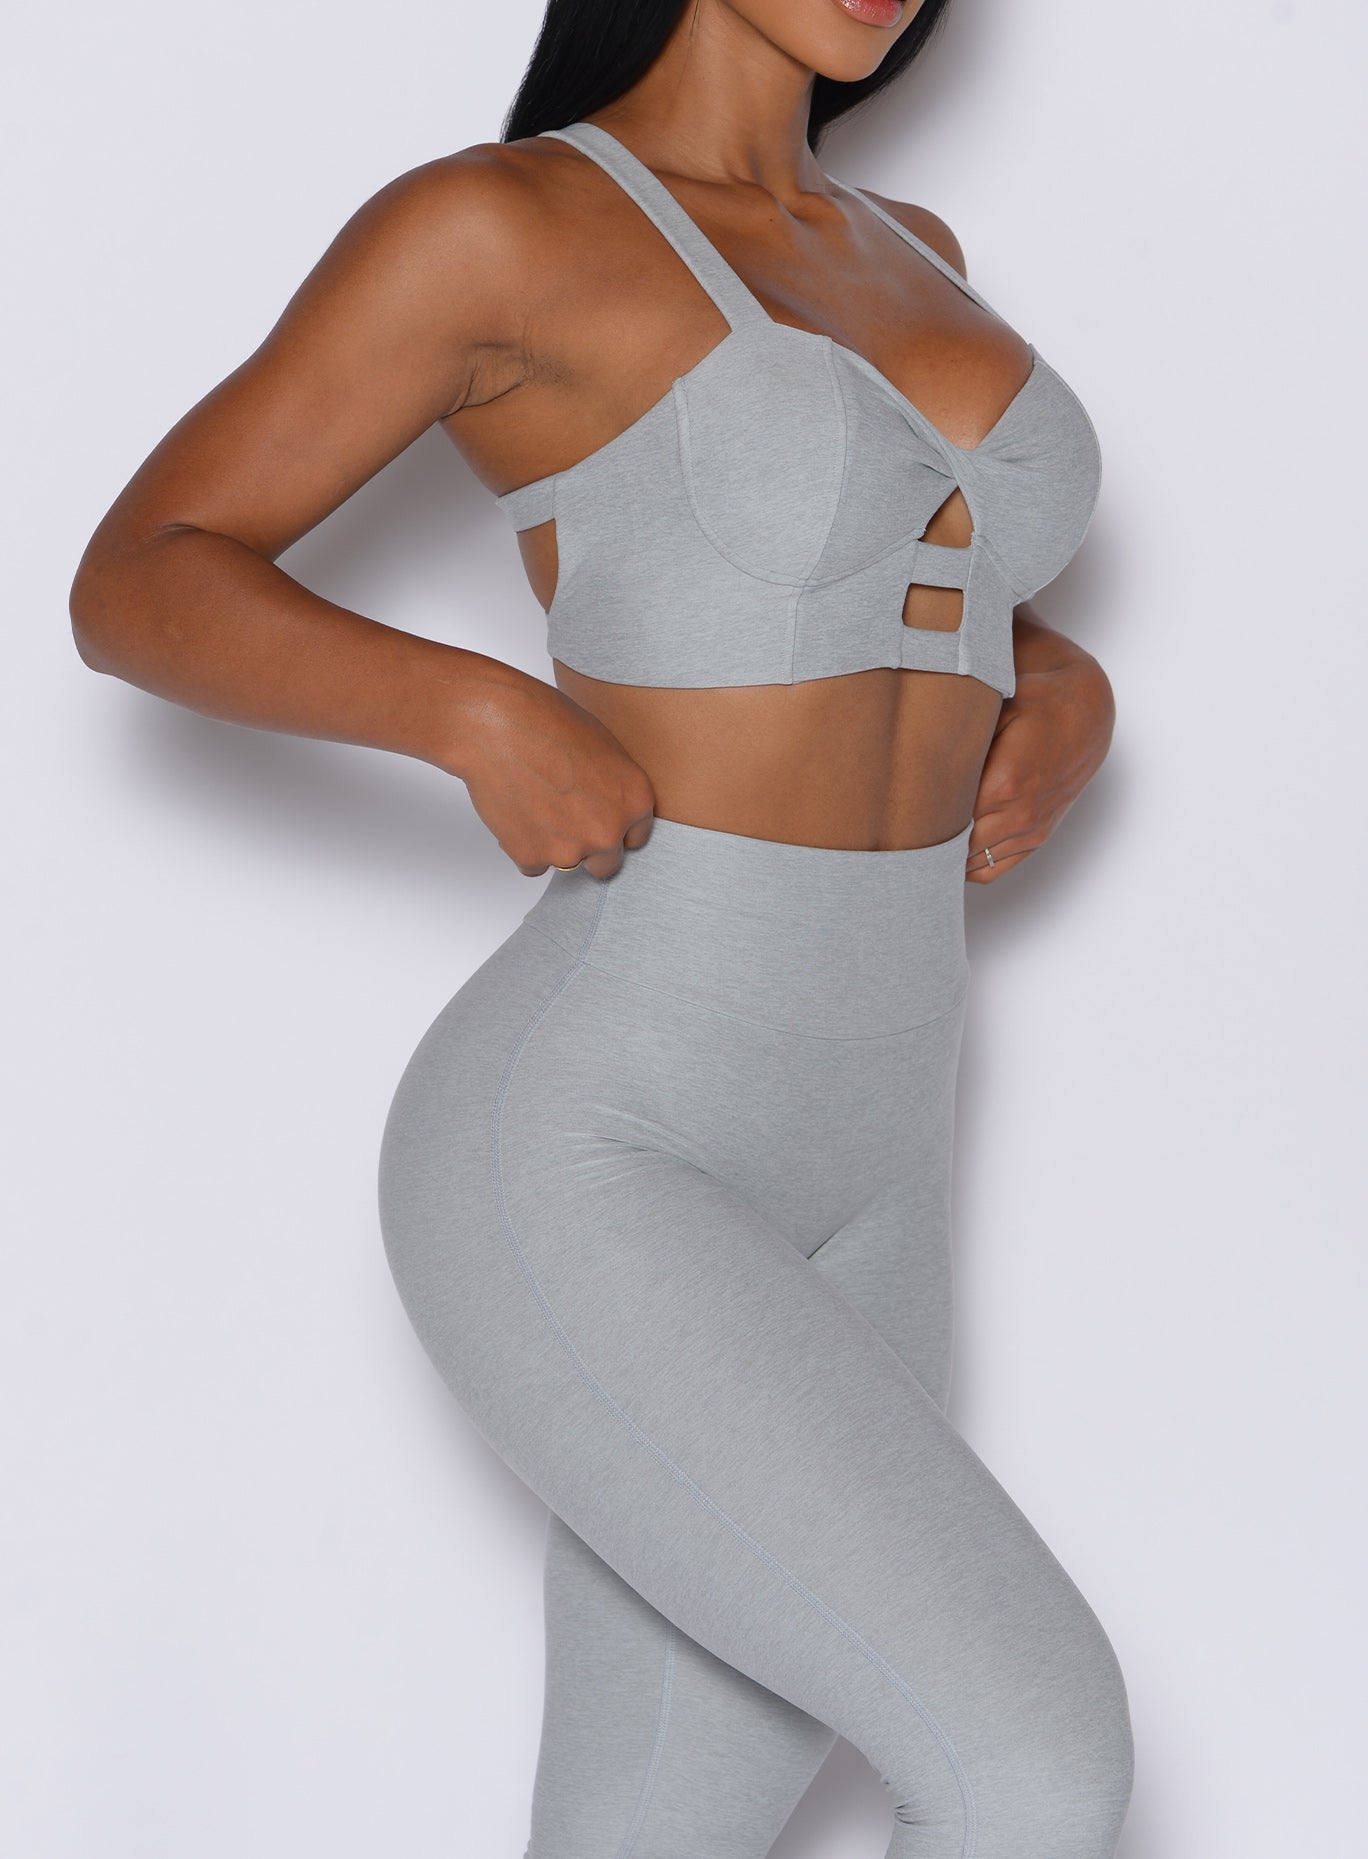 right side profile view of a model wearing our core set bra in light cloud color along with the matching leggings